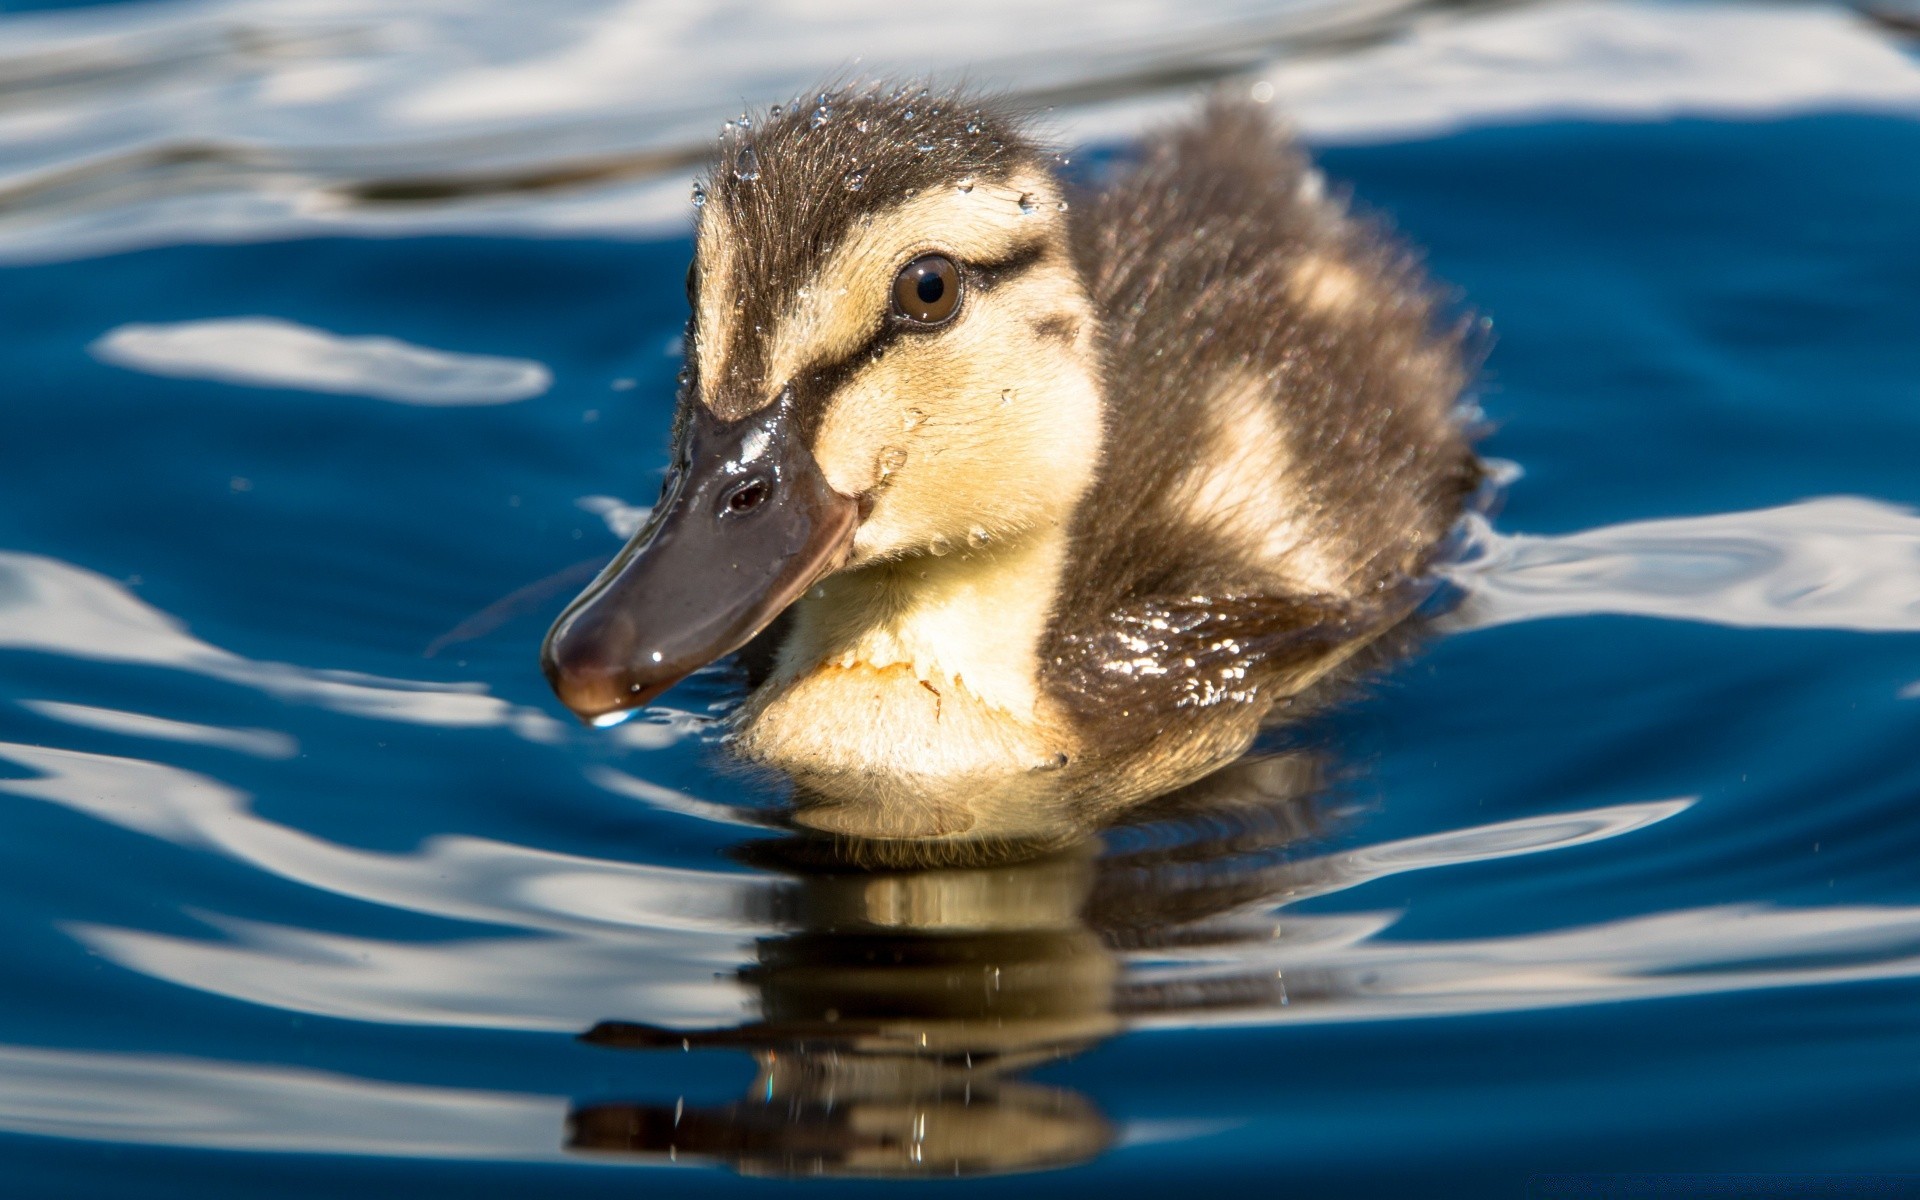 chicks duck water swimming wildlife bird nature duckling pool lake reflection wet outdoors waterfowl animal one mallard poultry